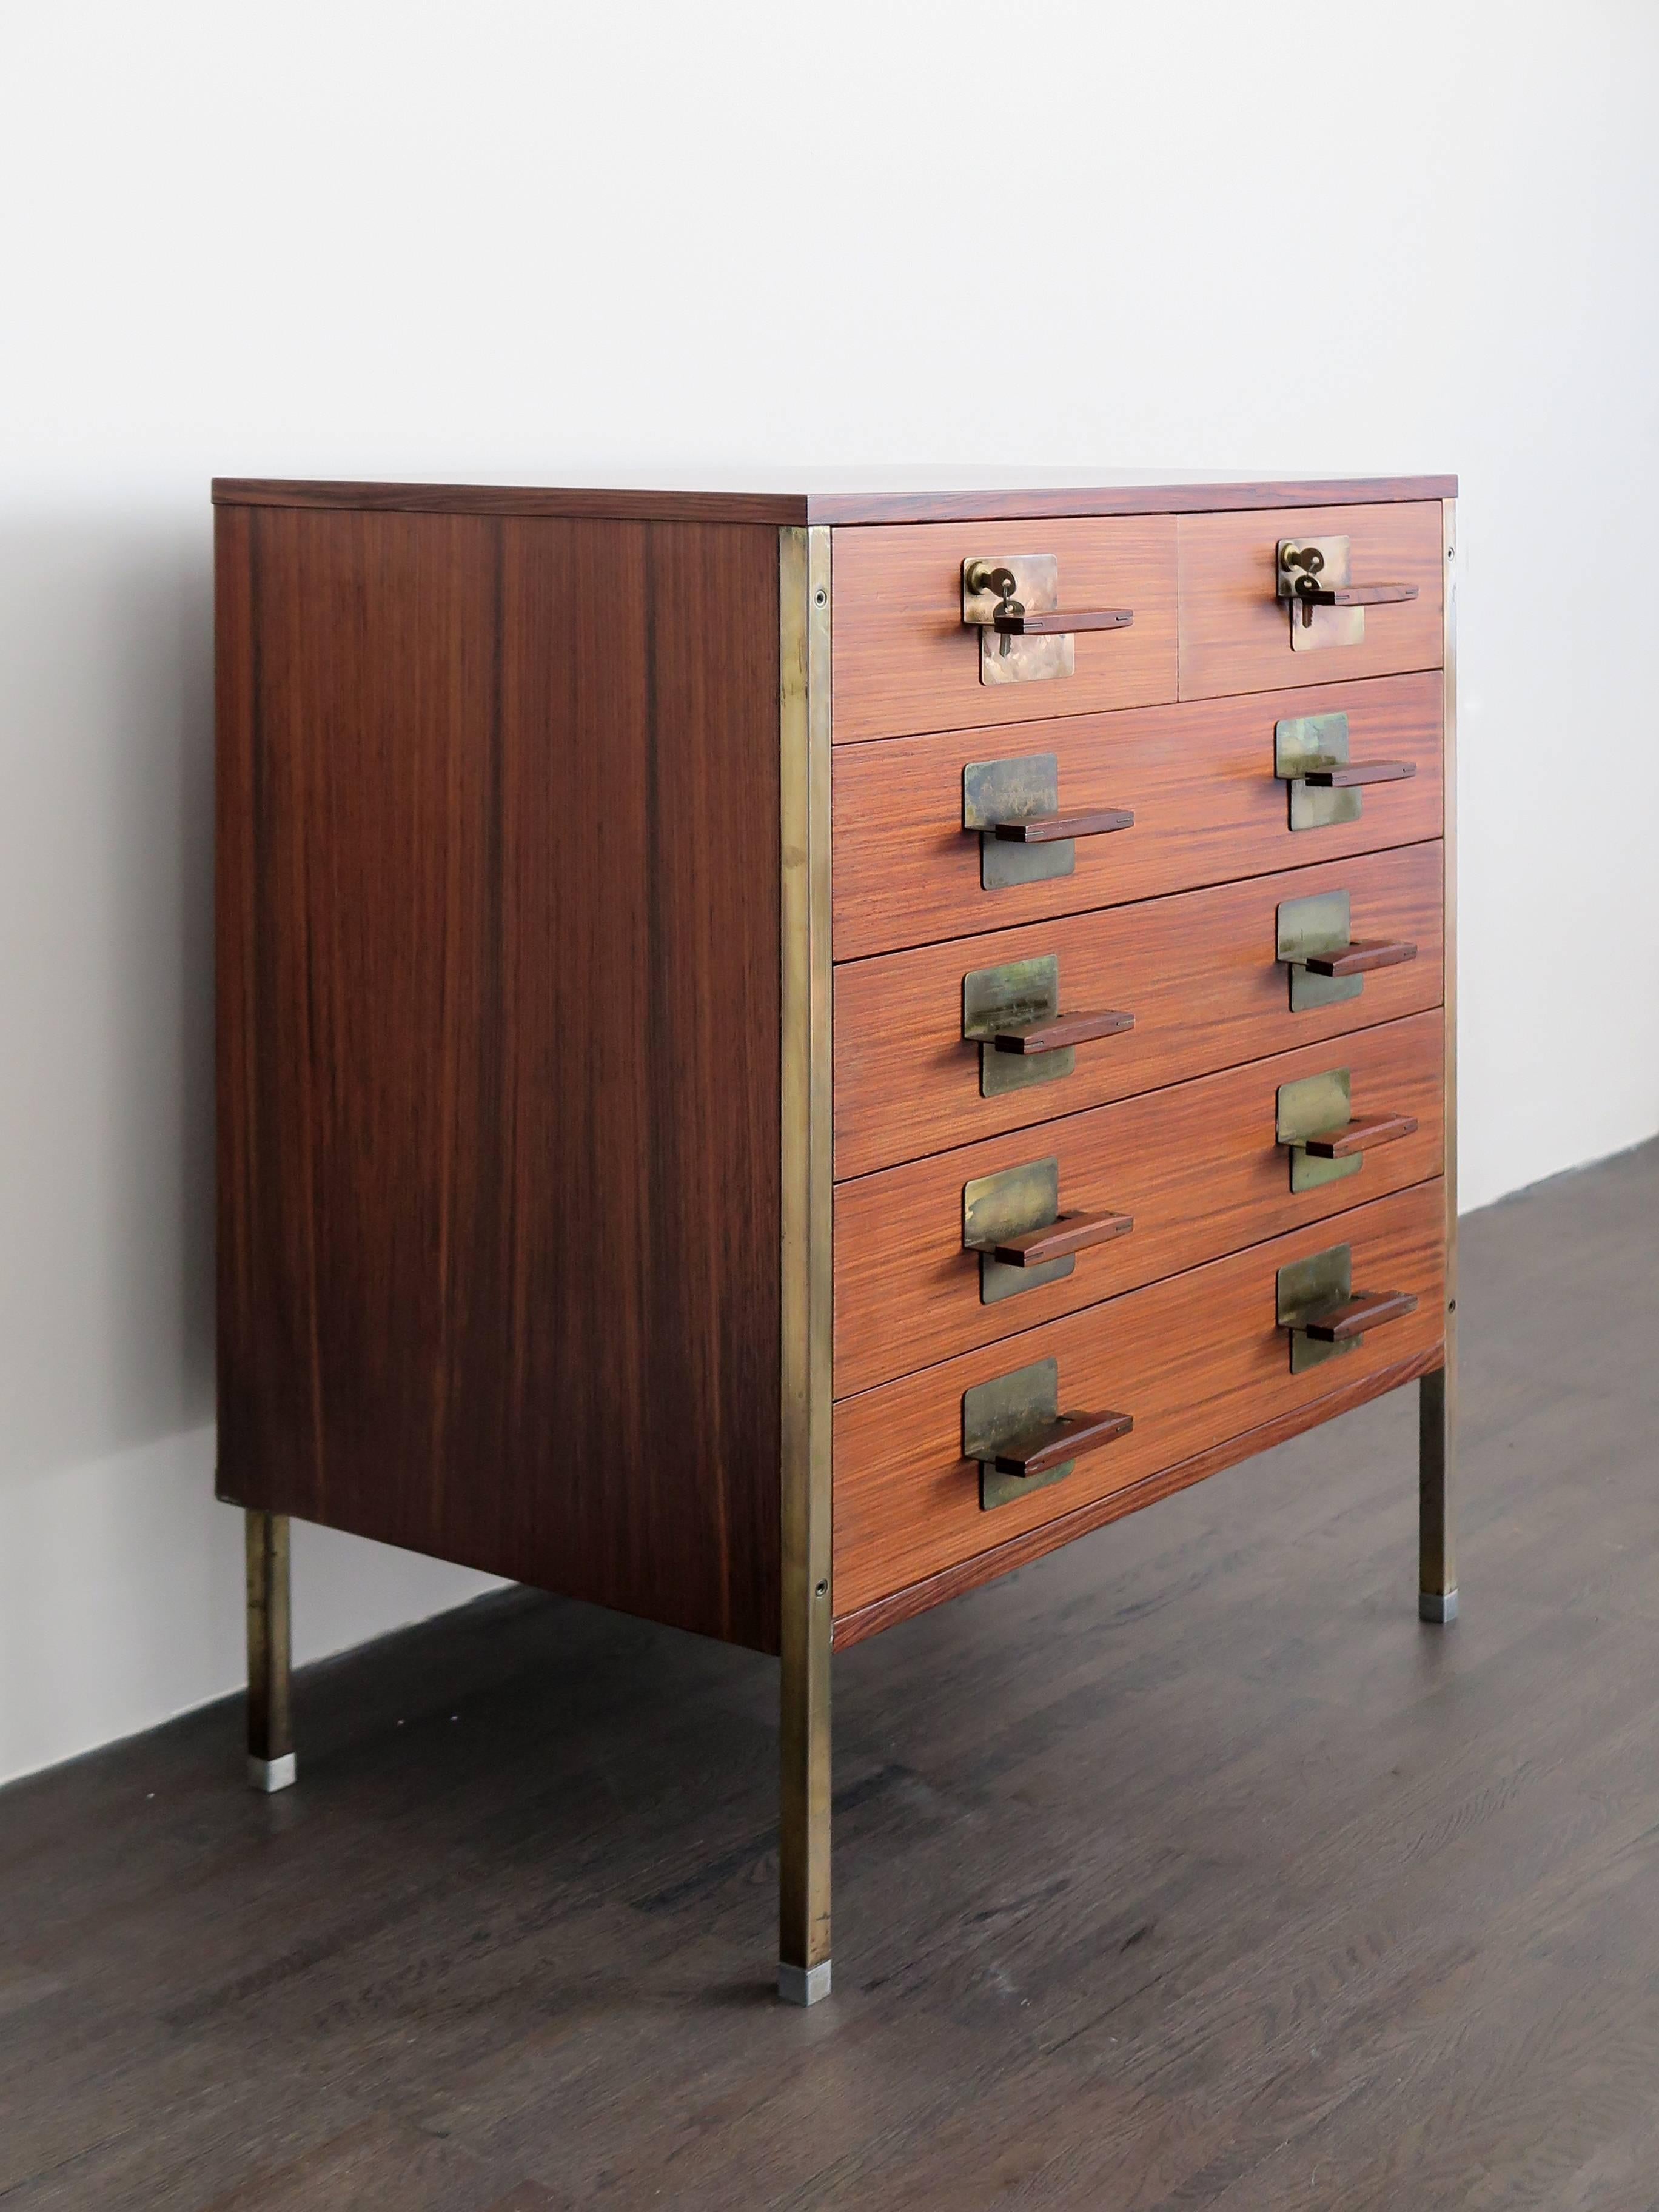 Italian very rare chest of drawers series Positano designed by Ico Parisi and manufactured by MIM (Mobili Italiani Moderni) in 1959.
Varnished steel, brass, and rosewood wood veneer with original keys and manufacturers label.